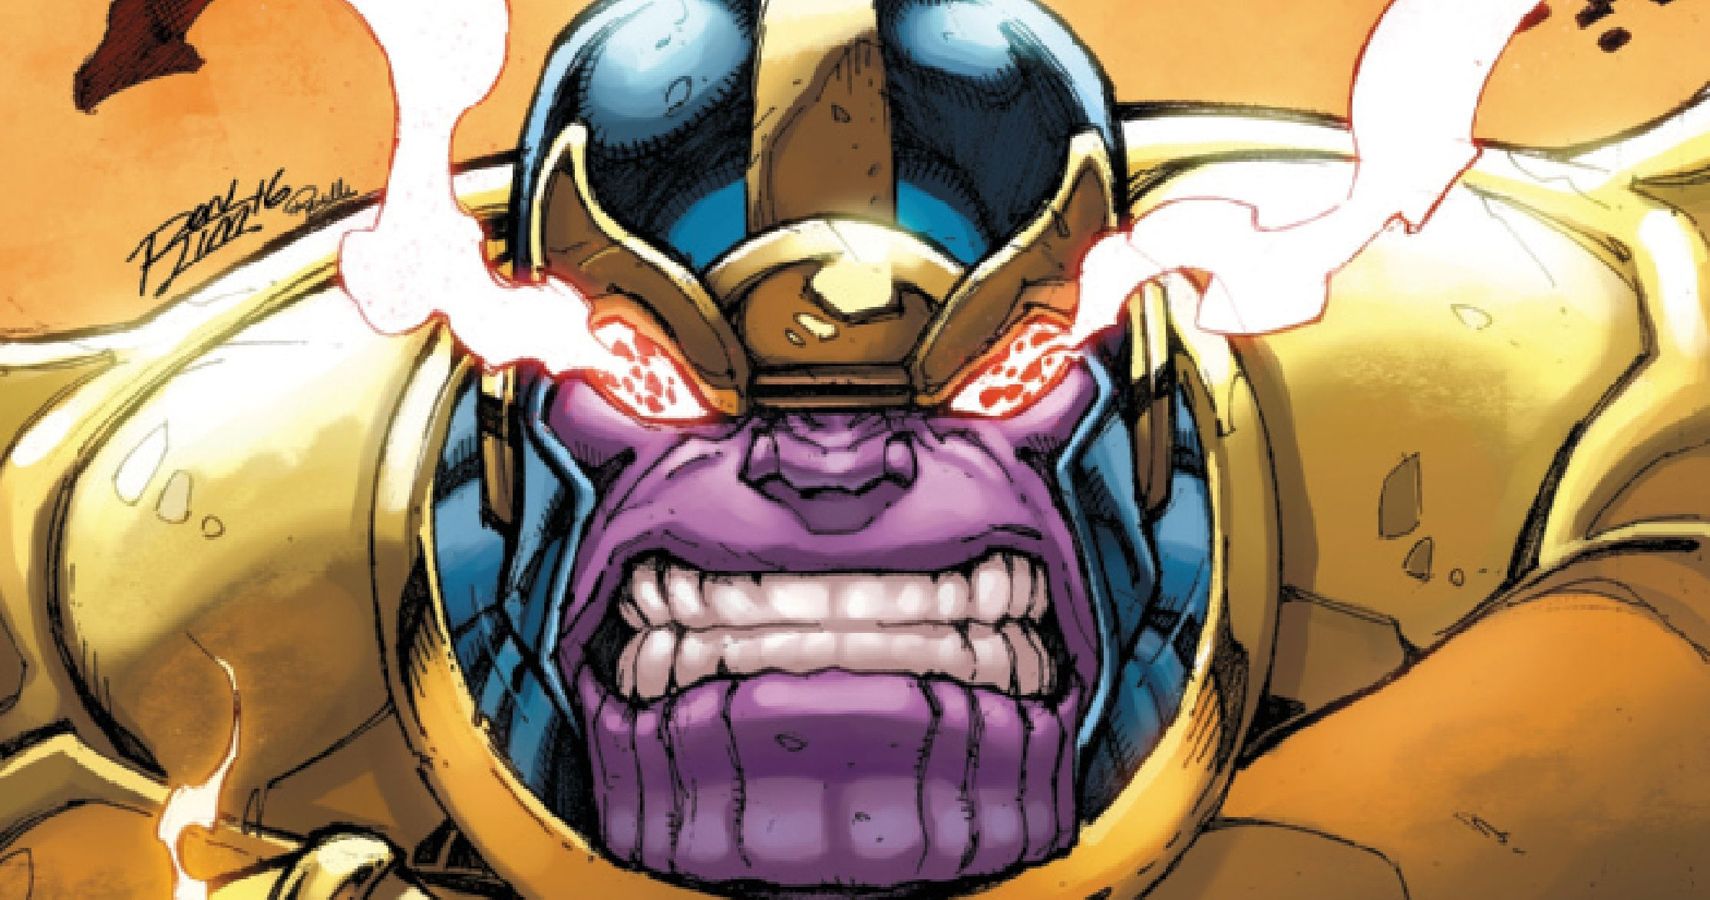 Avengers Endgame: 10 Comics To Read Before The Movie